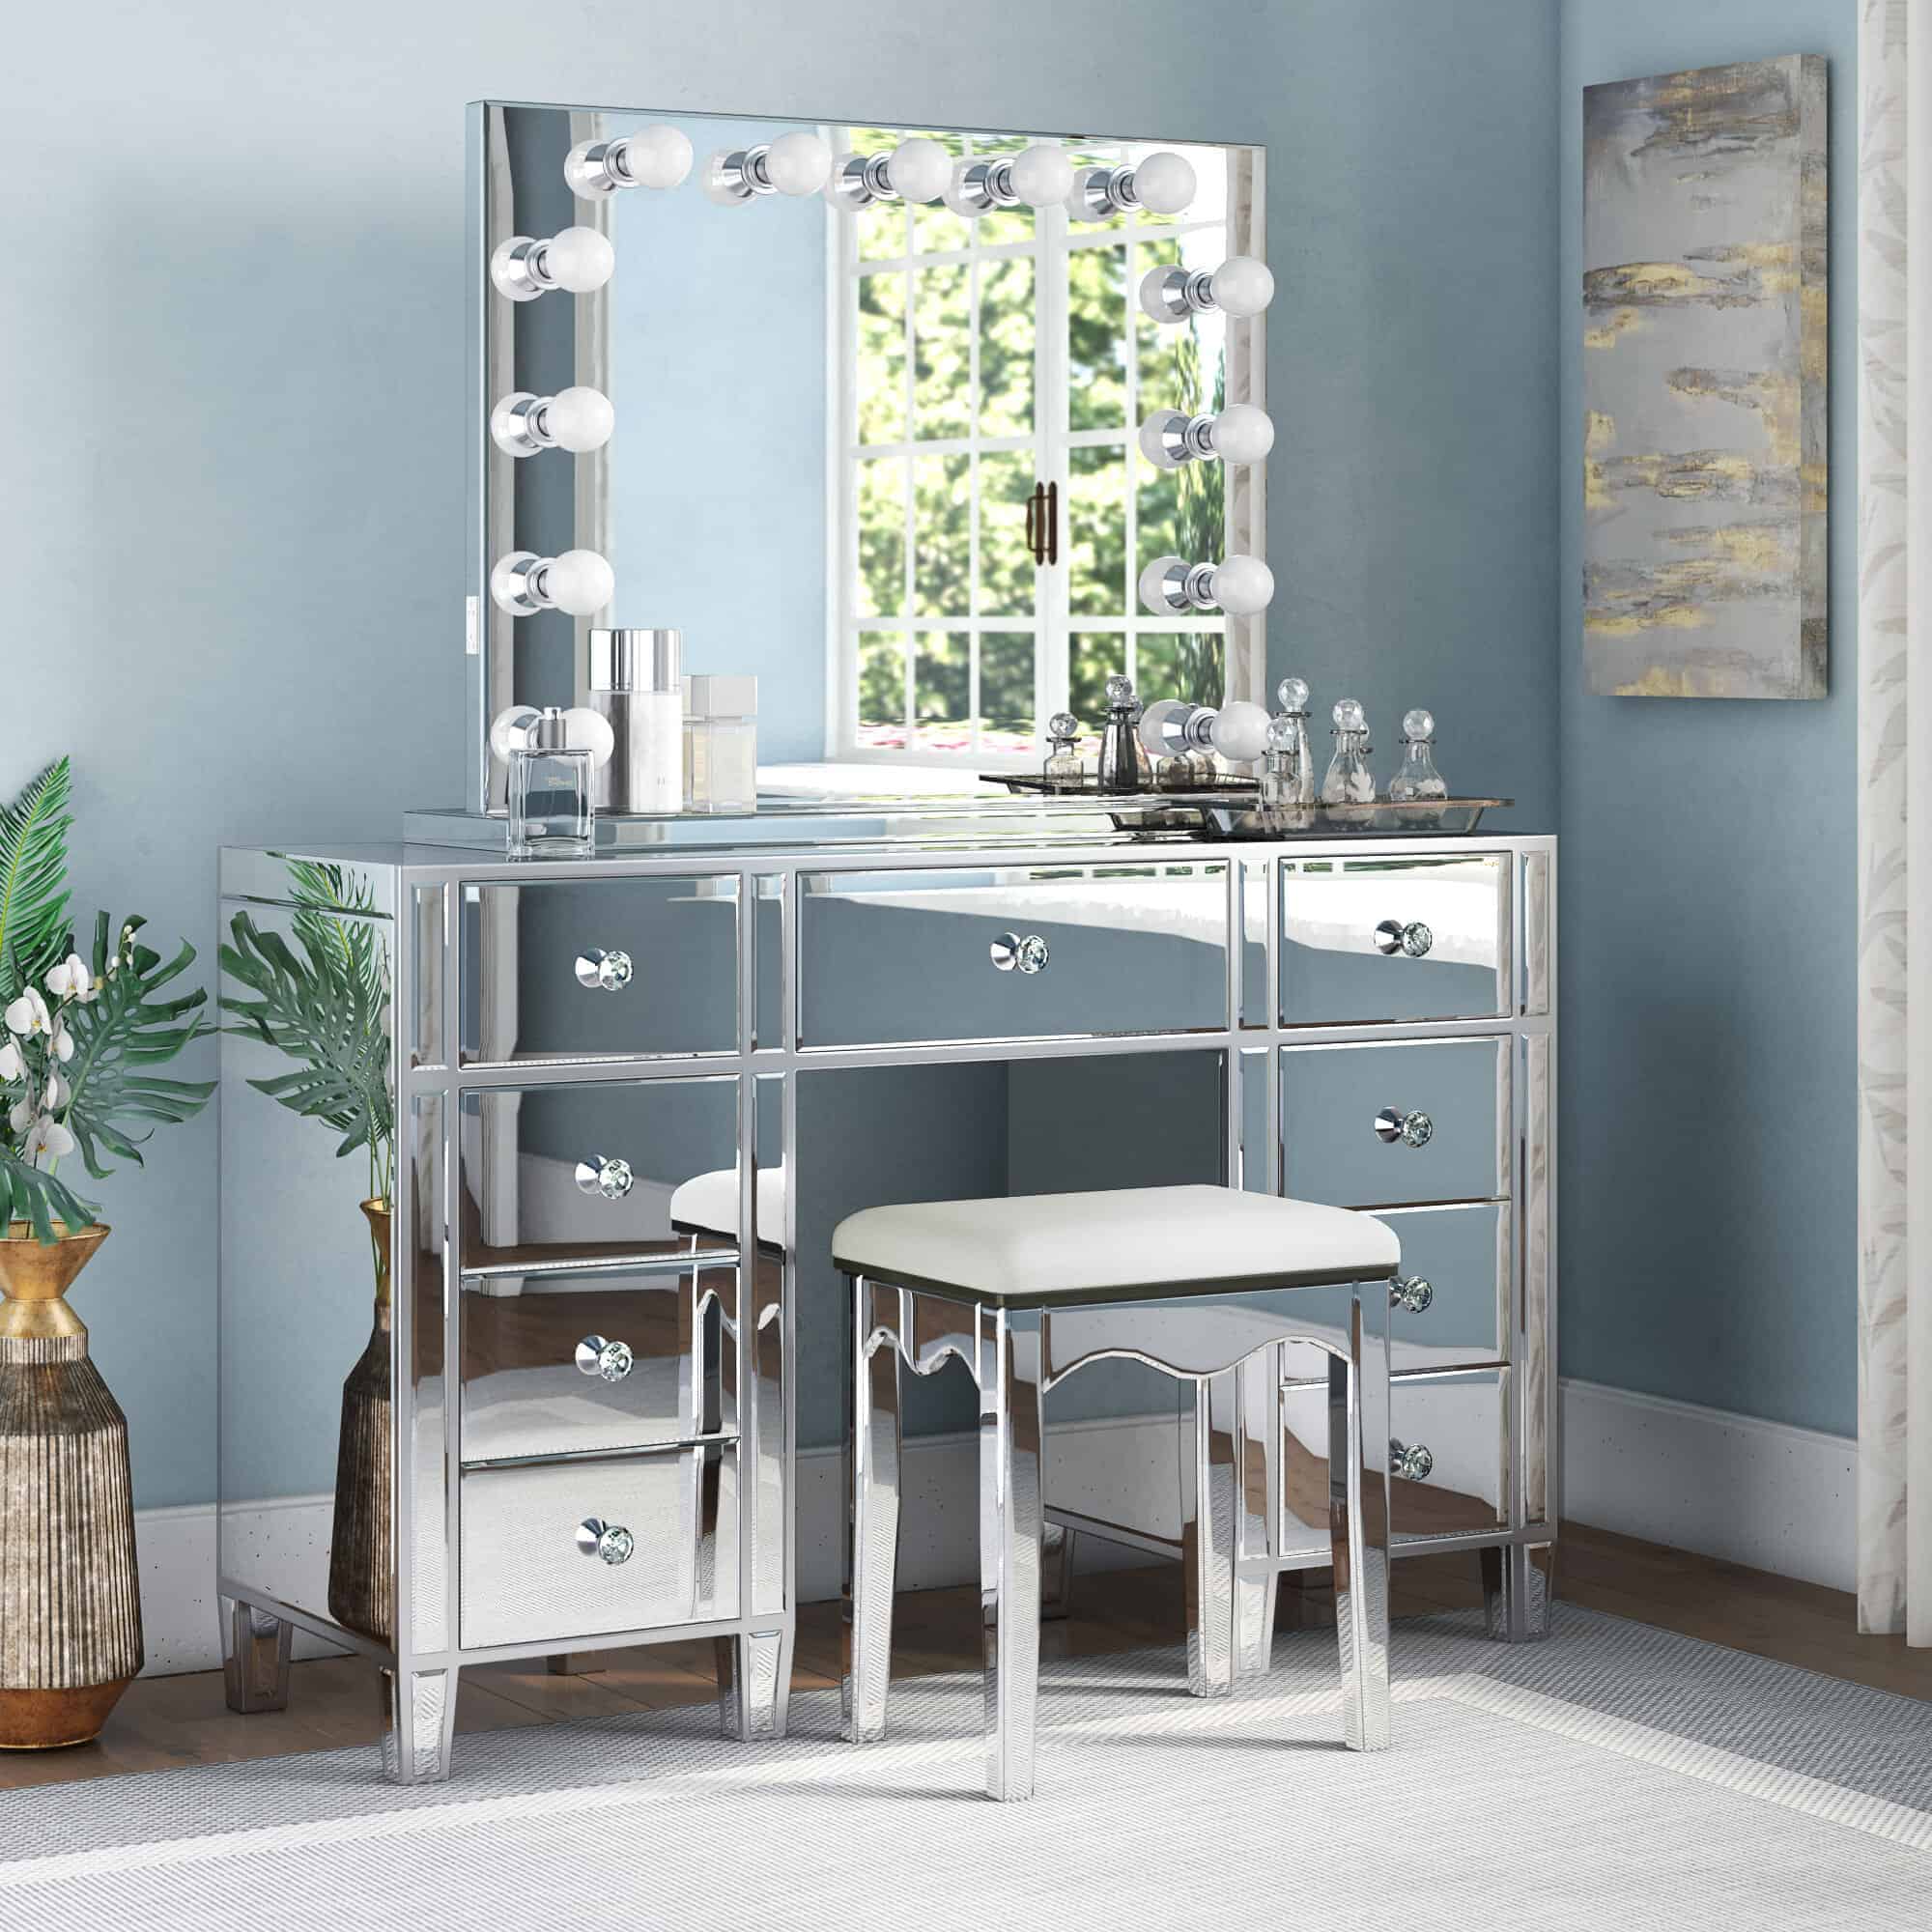 A stylish glass dressing table design with a big square mirror, lots of storage space, and a matching stool, in a blue room.